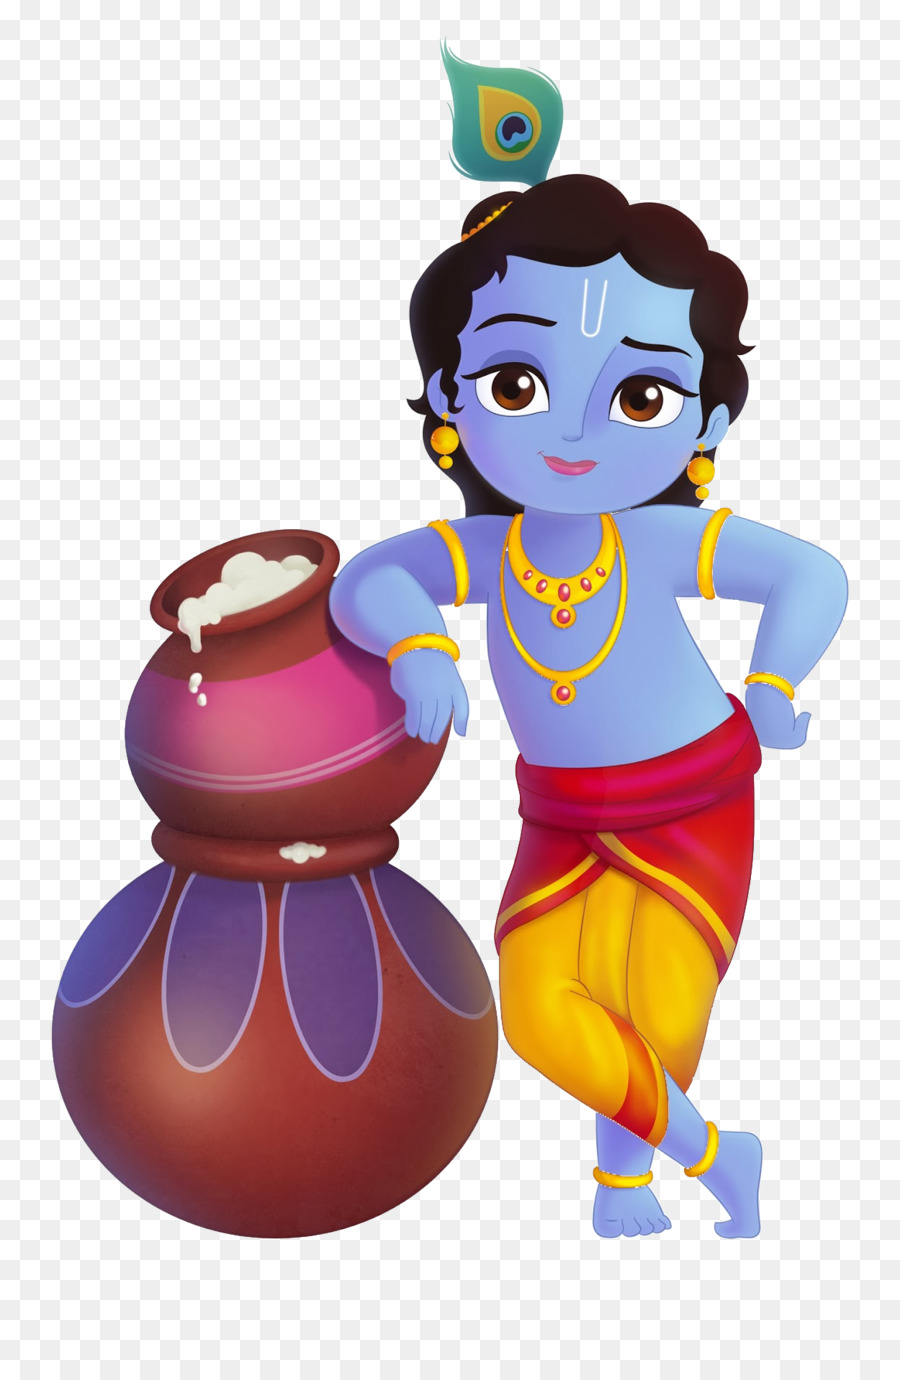 Lord Krishna Clipart Vector, Happy Krishna Janmashtami With Lord, Krishna,  Lord Krishna, Krishna Janmashtami PNG Image For Free Download